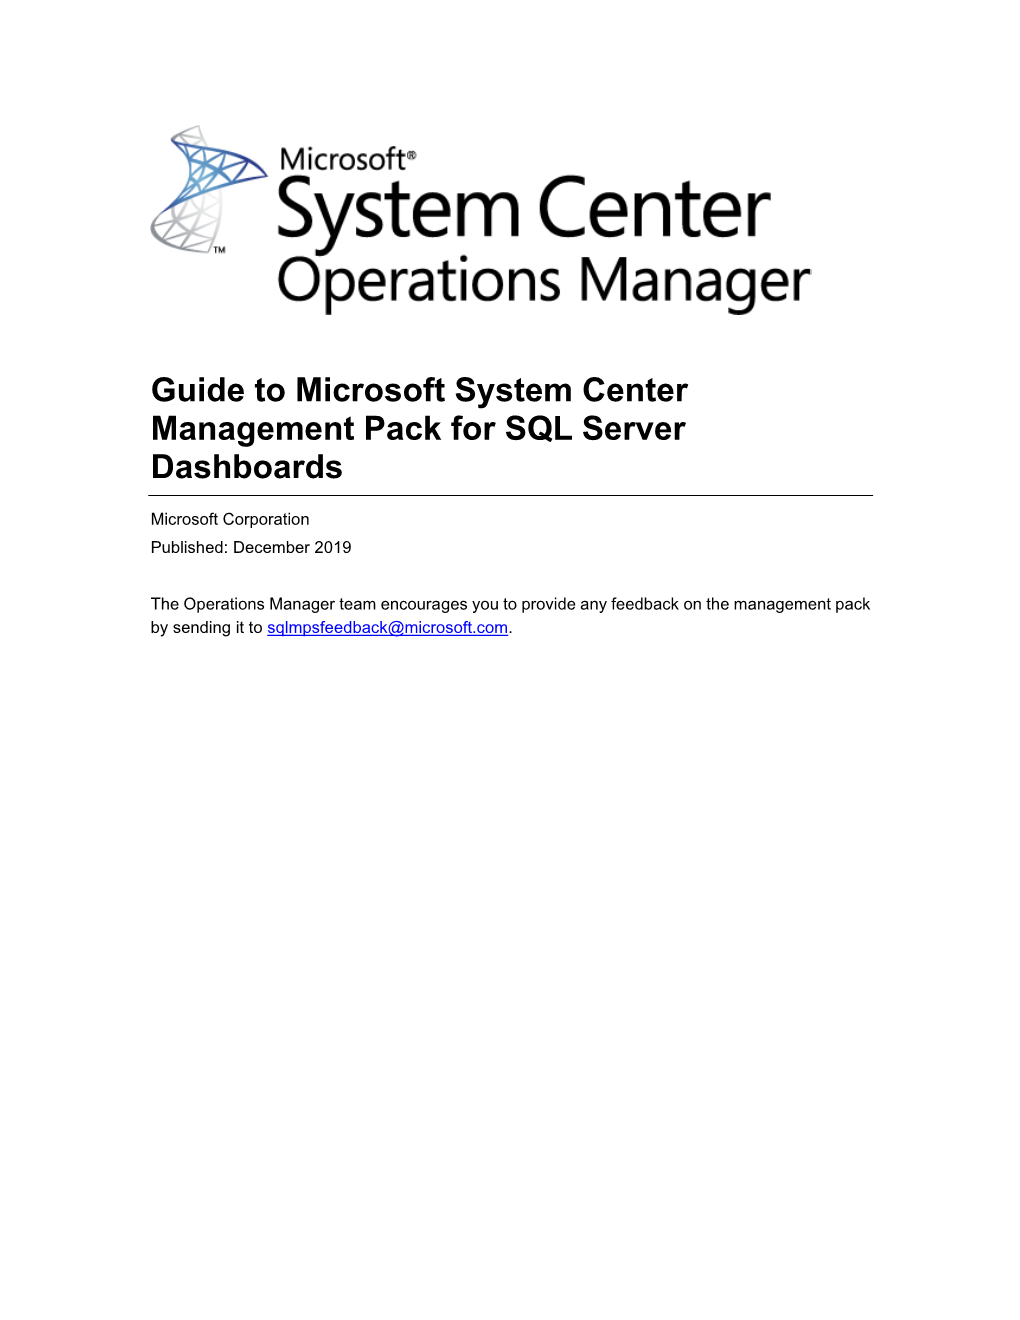 Guide to Microsoft System Center Management Pack for SQL Server Dashboards